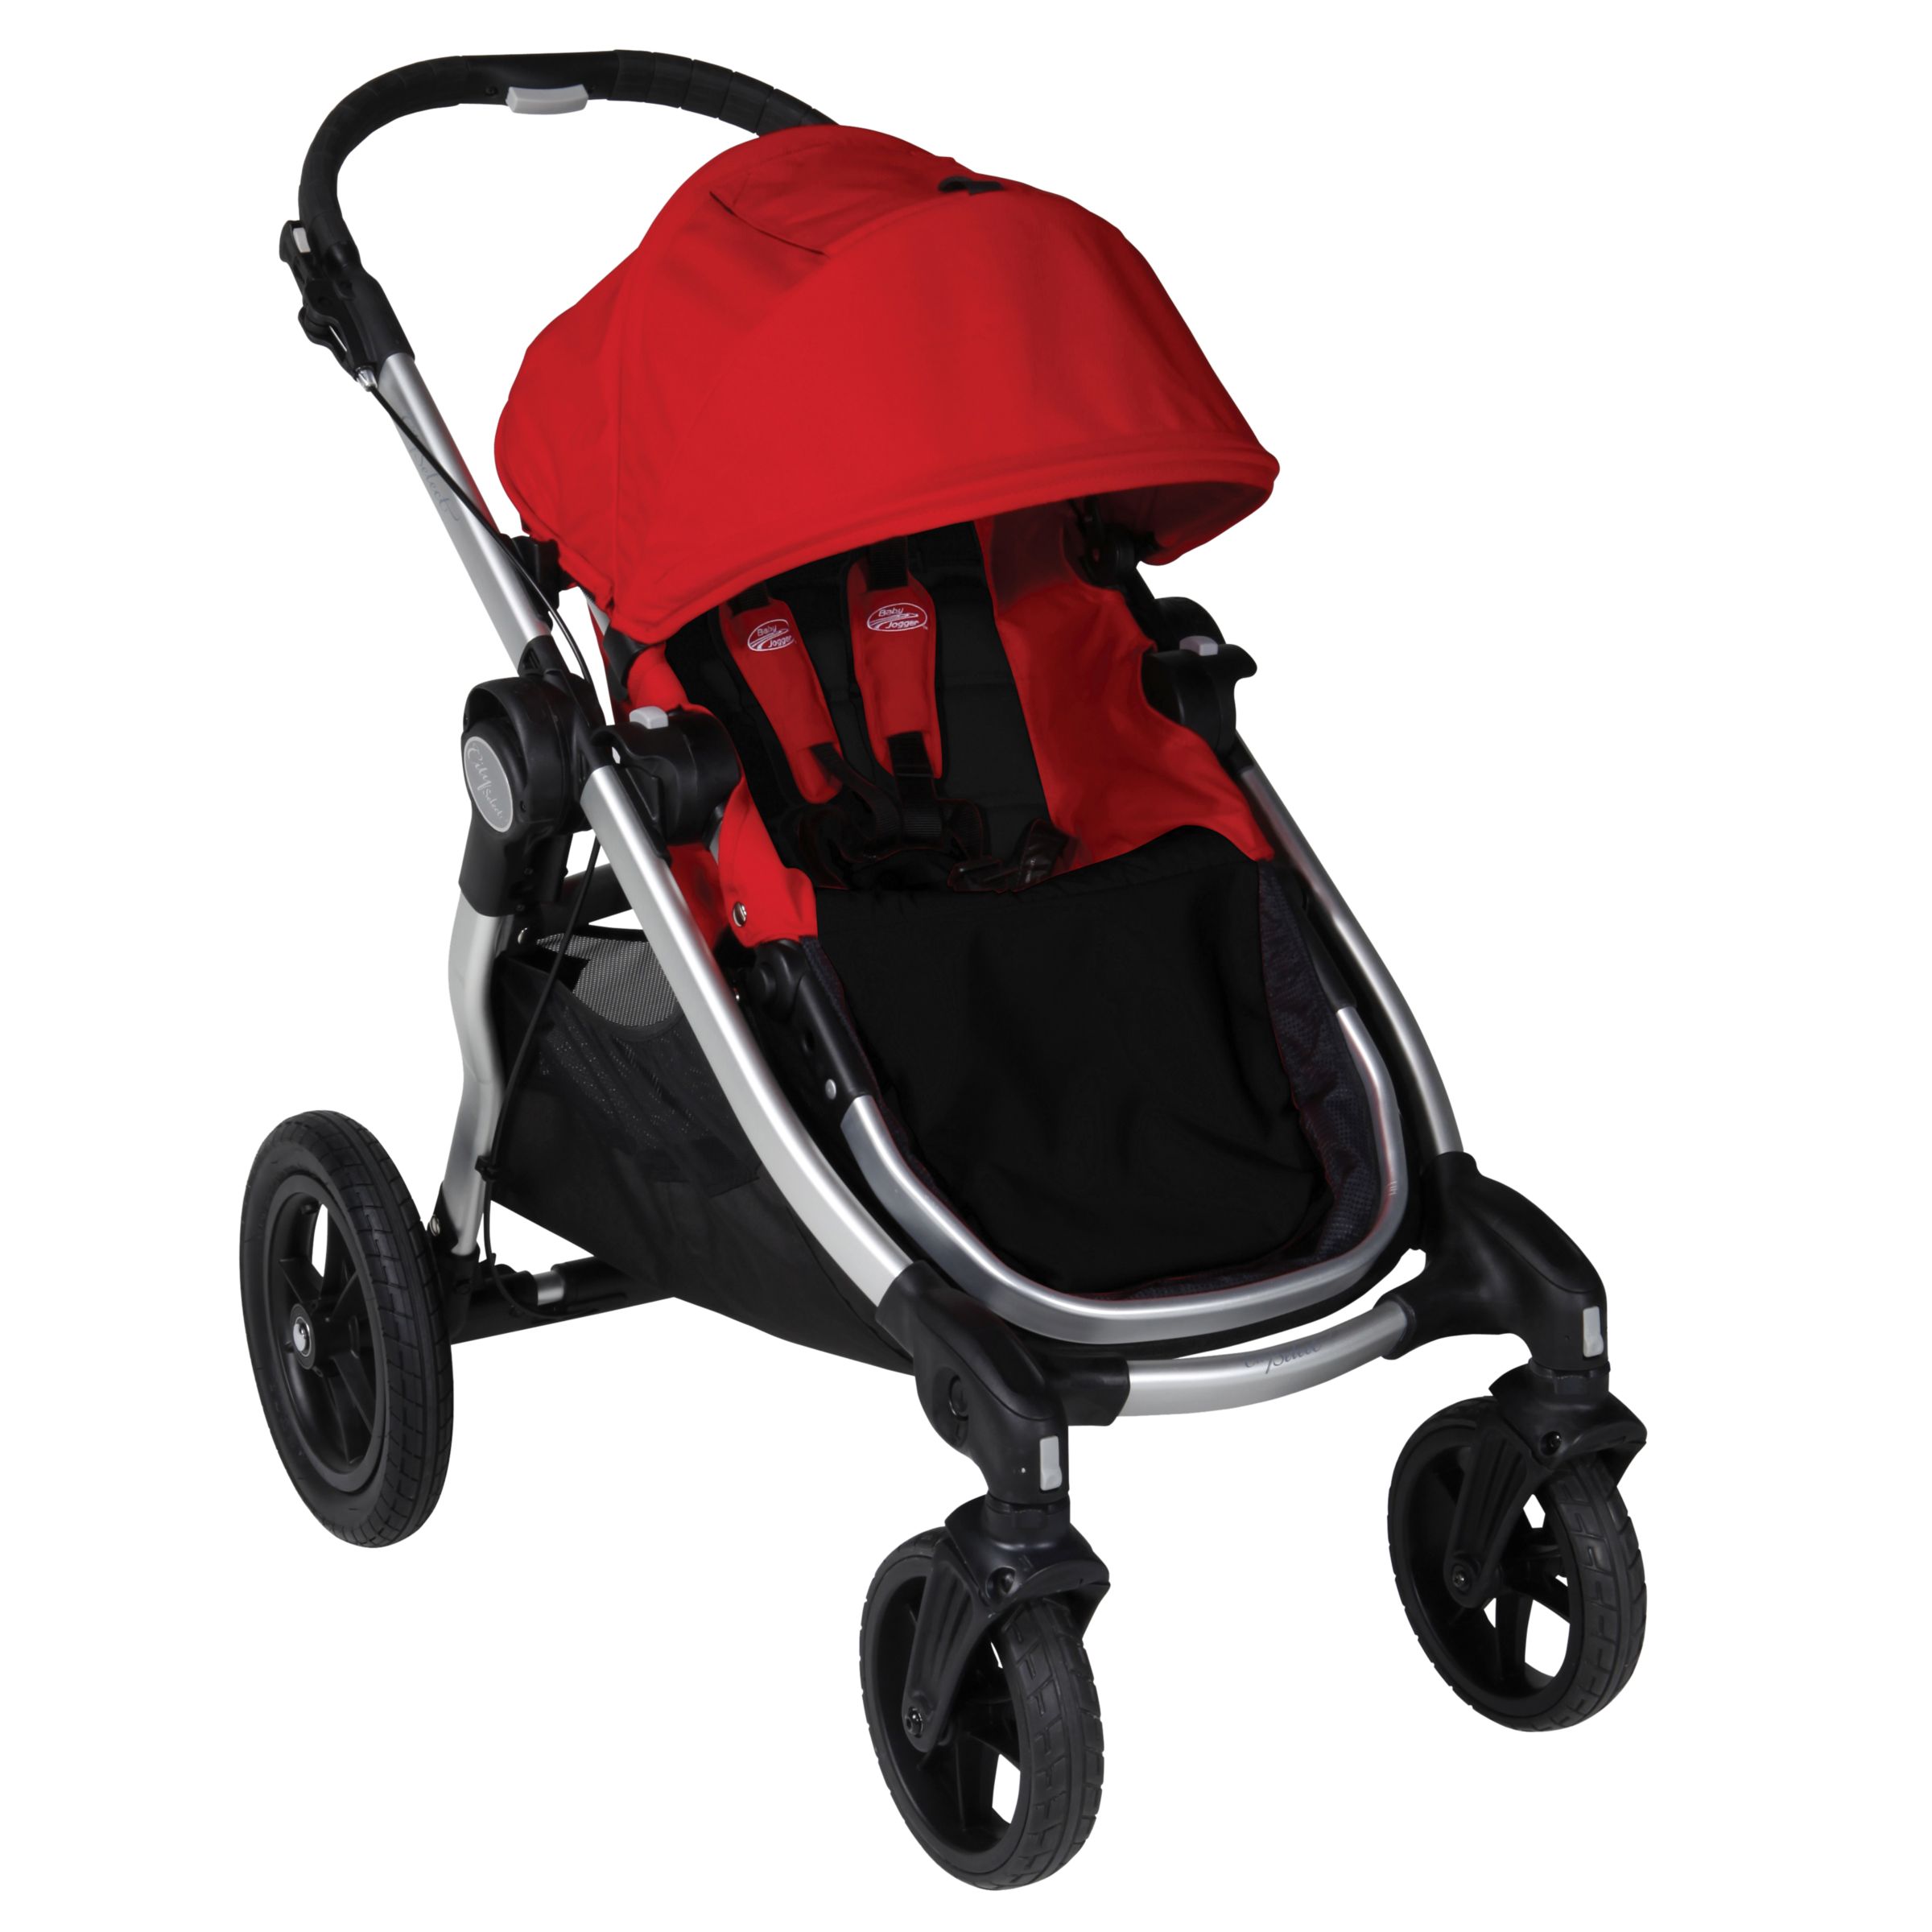 Baby Jogger City Select Pushchair, Red at John Lewis